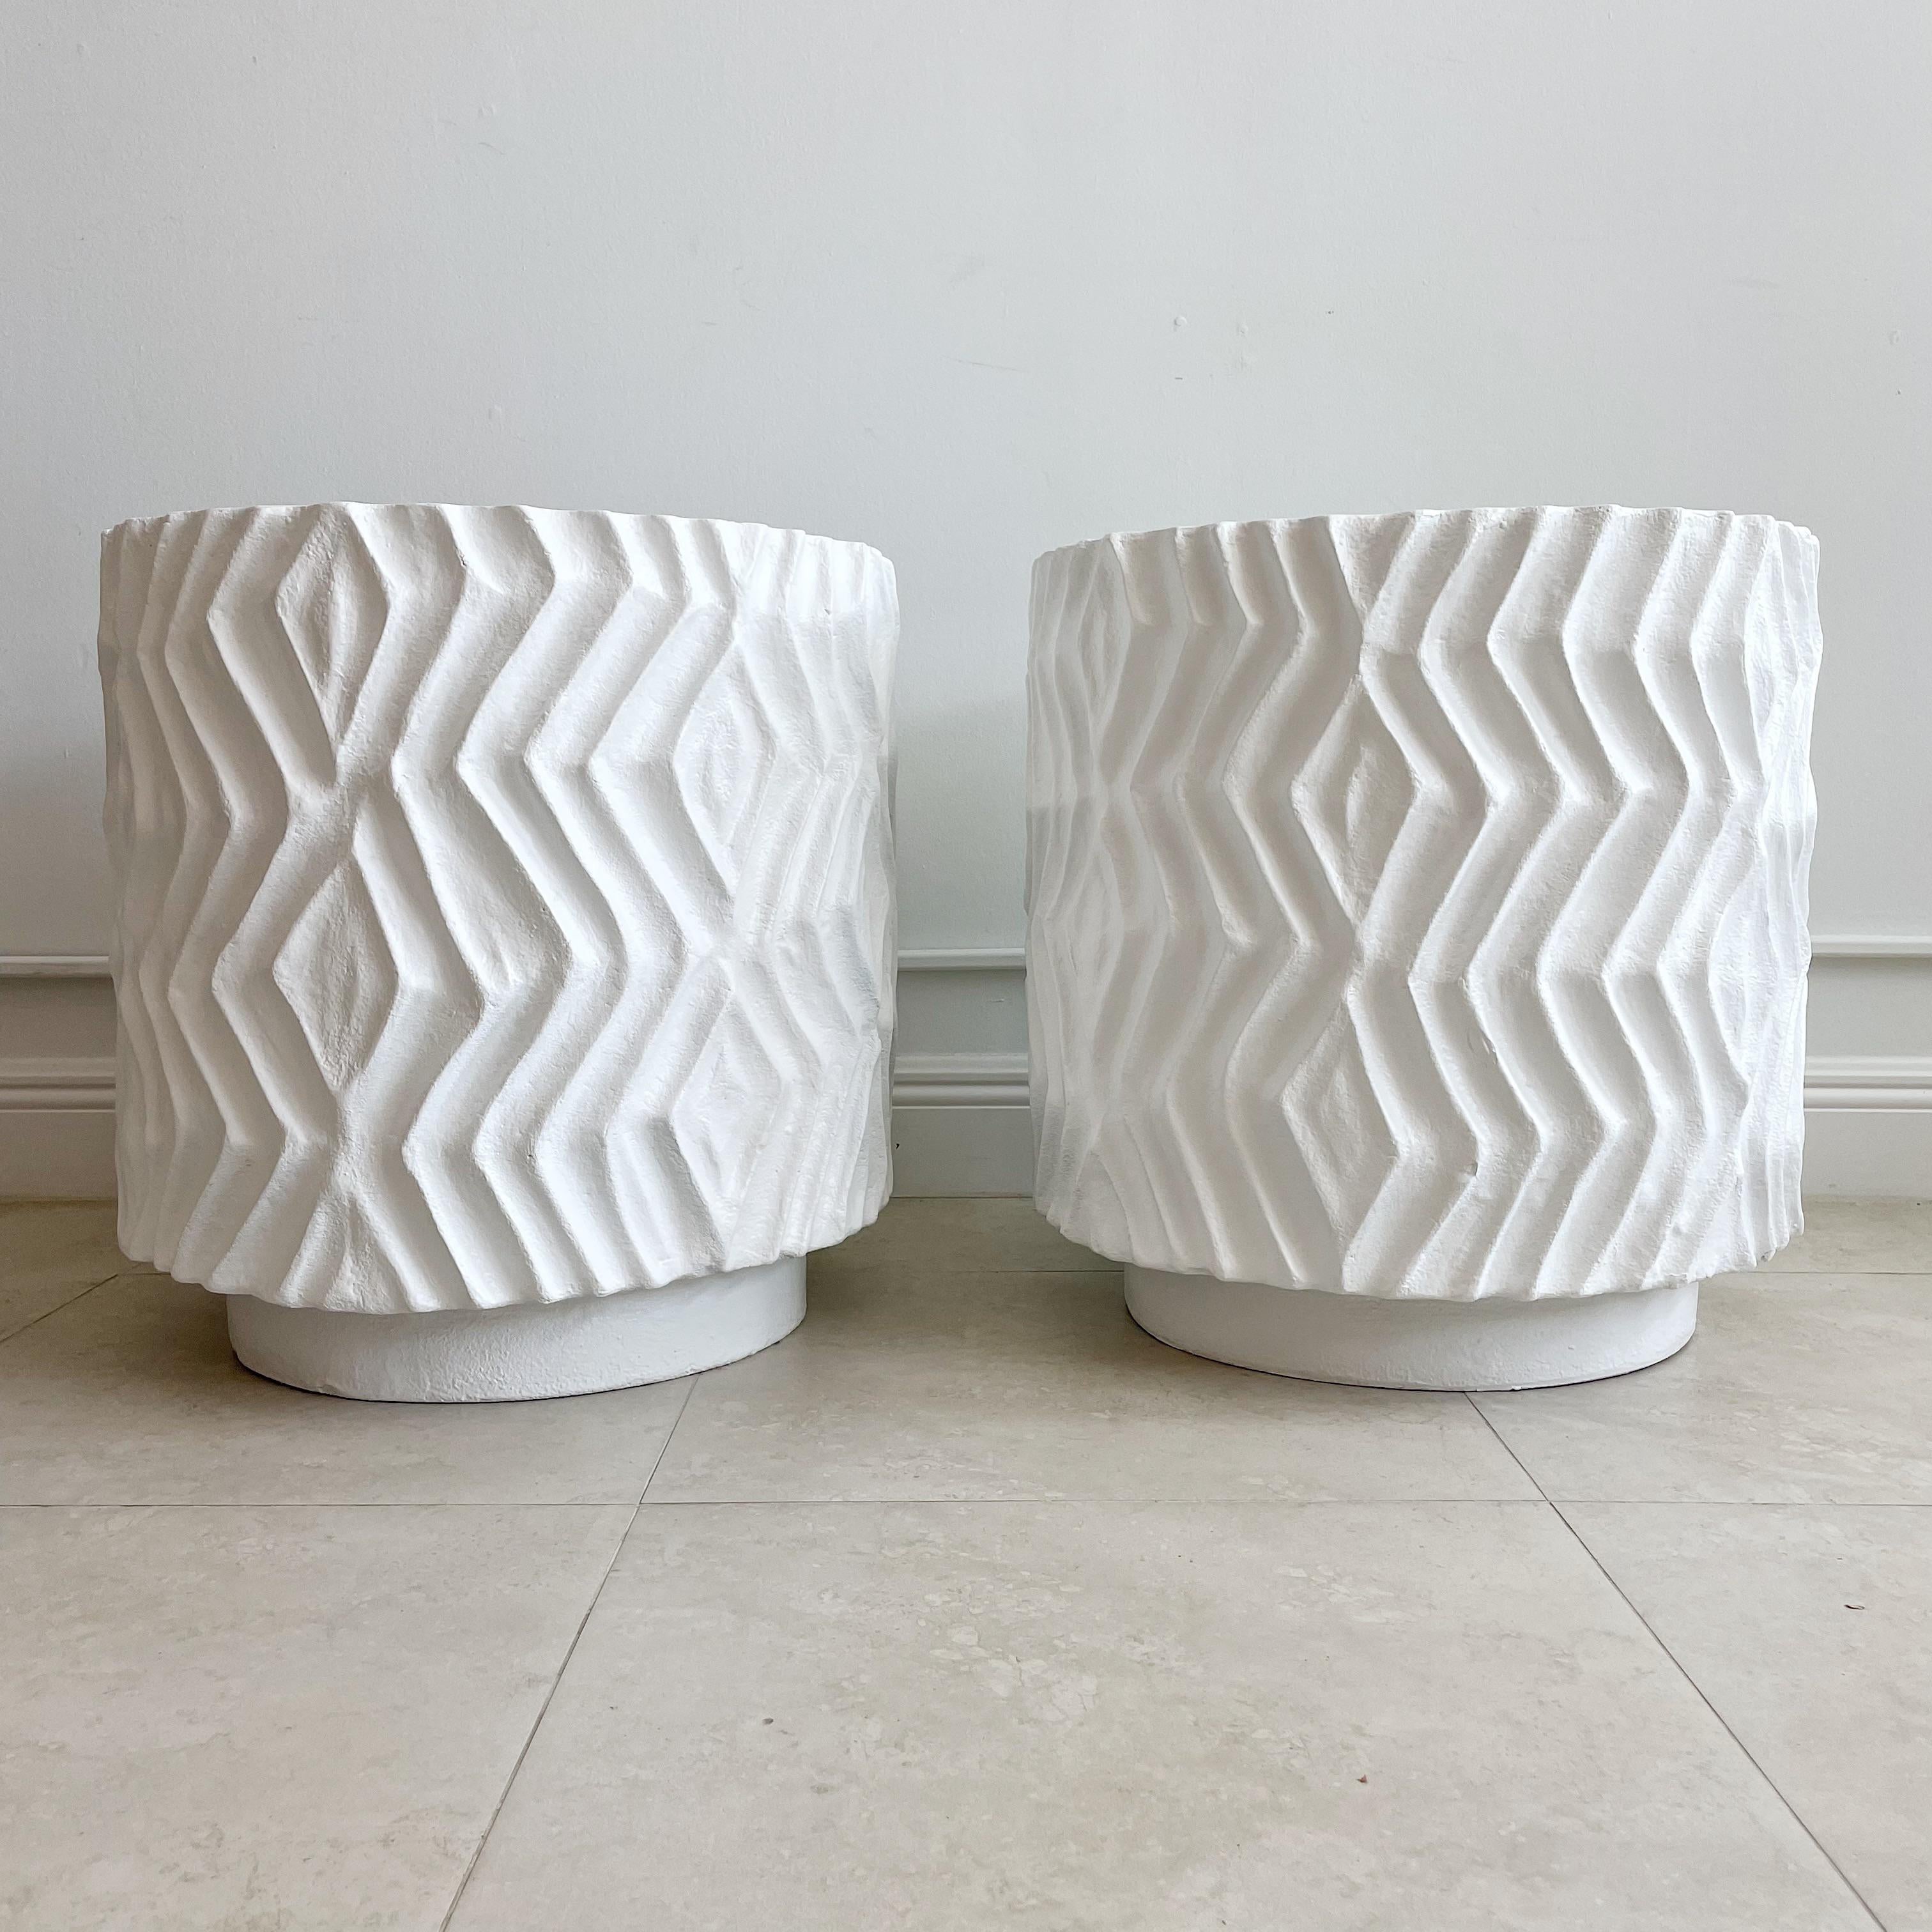 Pair large deeply incised solid plaster pedestals, end tables, side tables. These have been completely professionally restored. Unsigned circa 1980's. From a Palm Beach Estate. These tables are thick plaster and therefore extremely heavy.